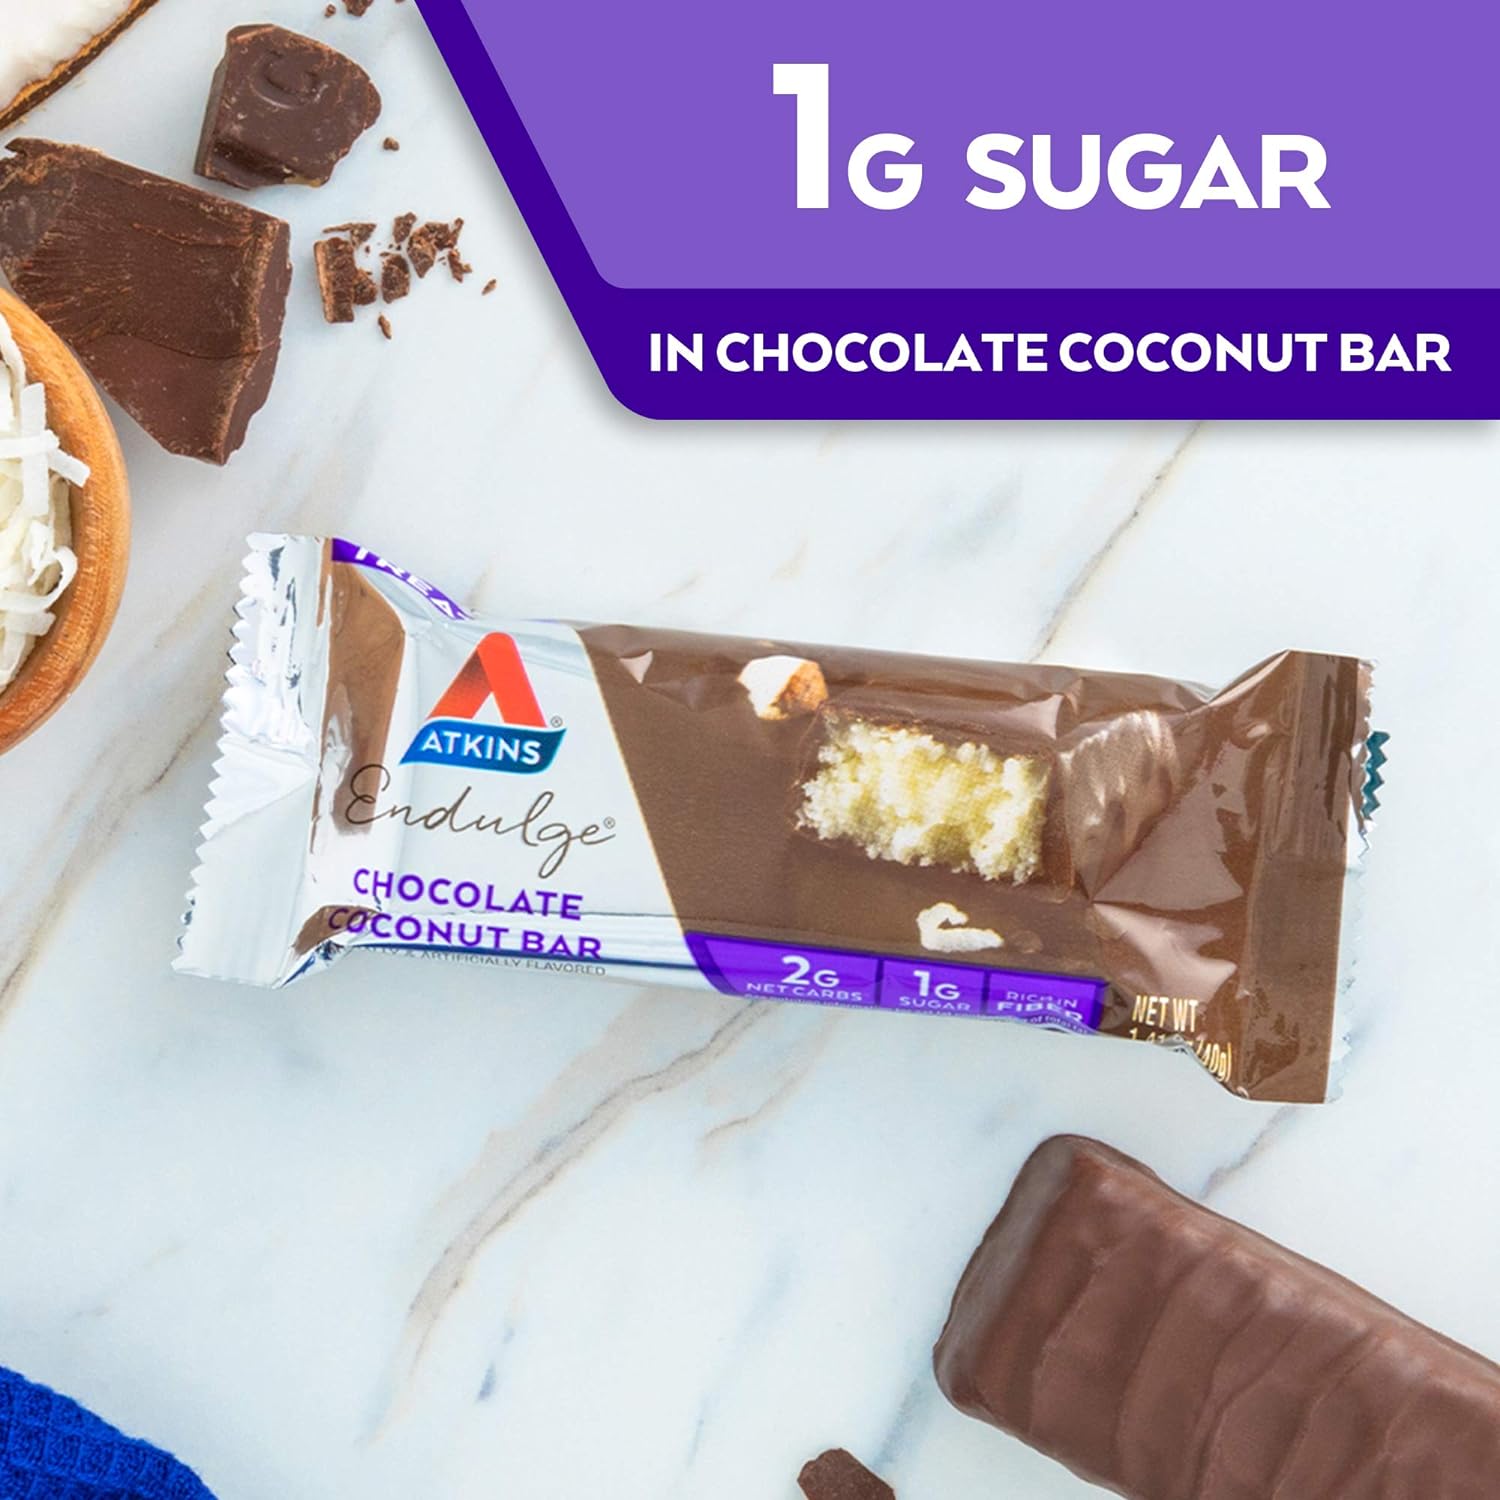 Atkins Endulge Chocolate Coconut Bars 5-Count as low as $4.14 when you buy 2 (Reg. $10.25) + Free Shipping -$0.83/Bar